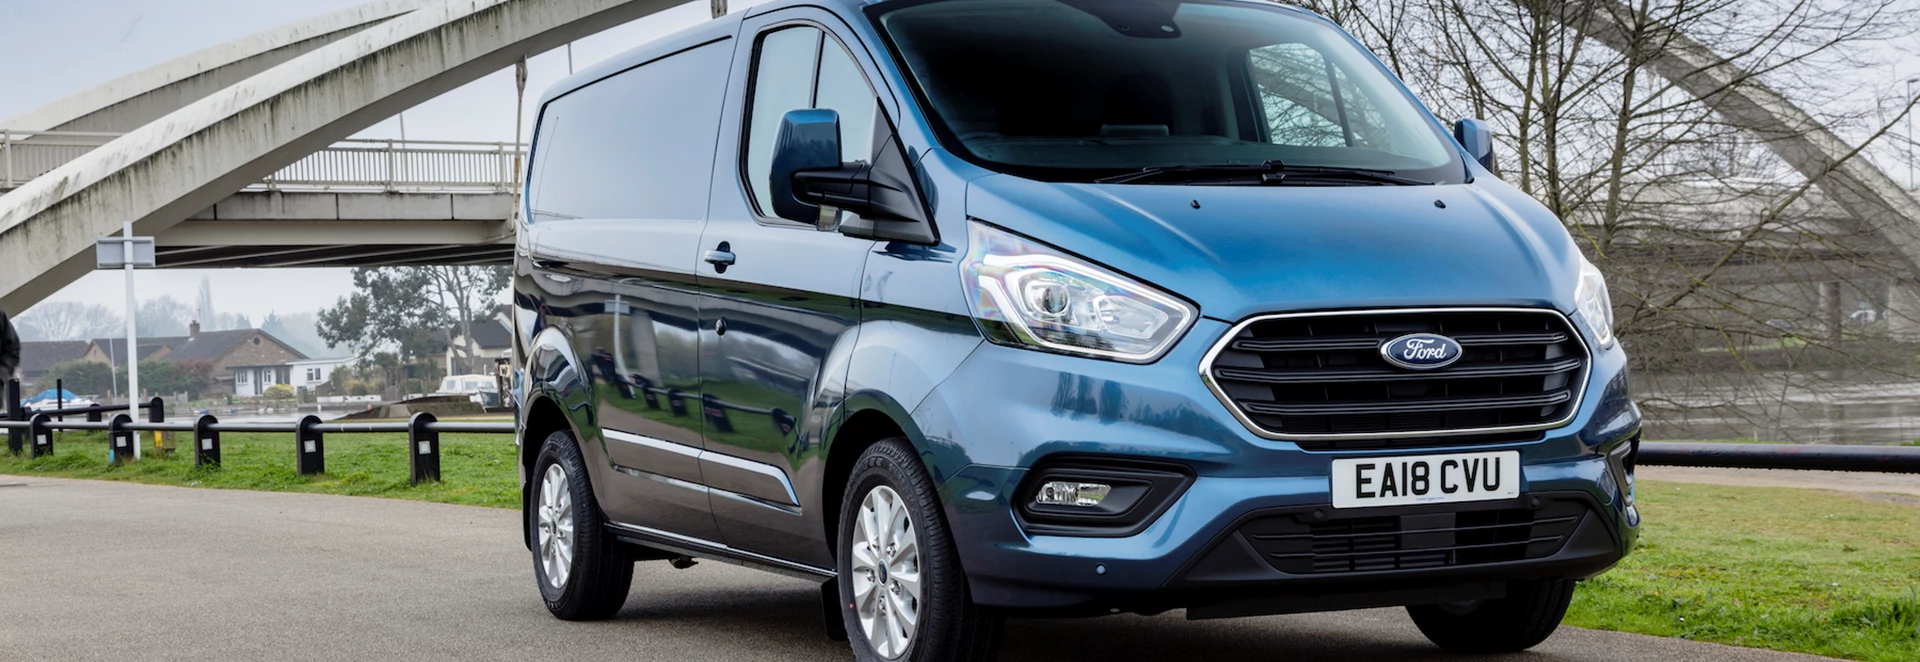 5 things you didn’t know about the Ford Transit Connect